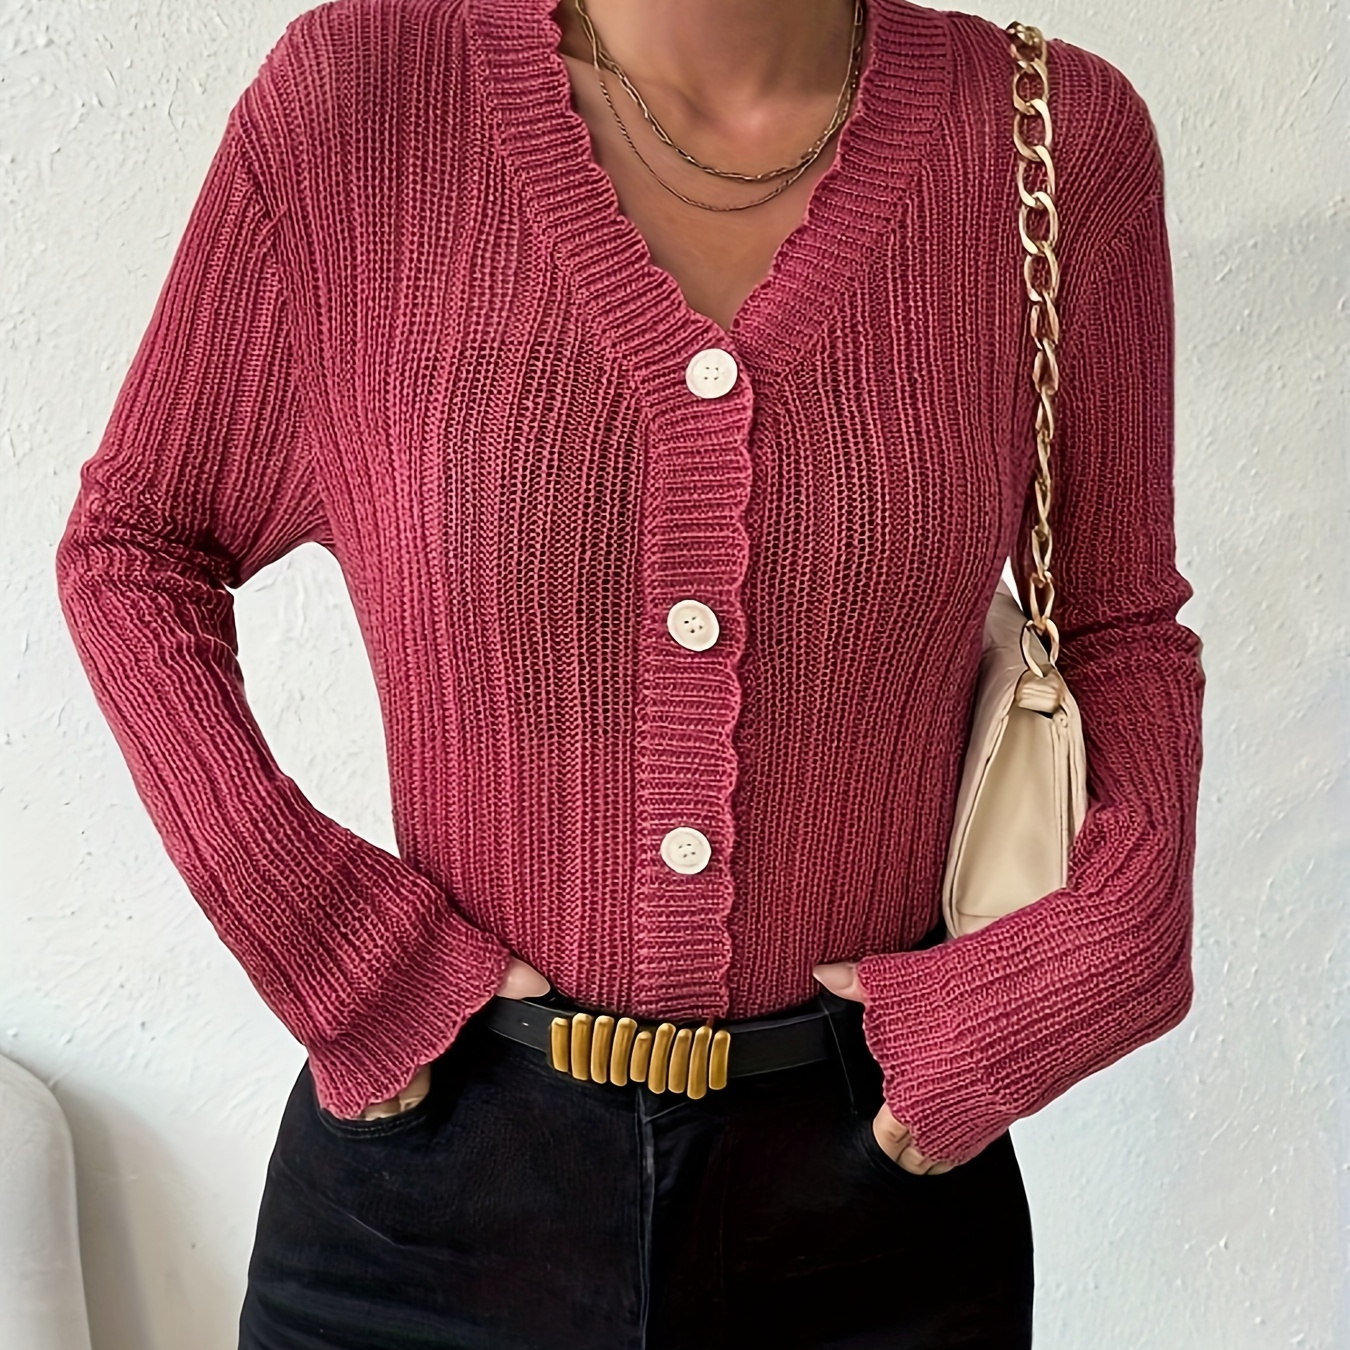 

Solid Color Button Front Cardigans, Elegant Loose Long Sleeve Knitted Cardigans Top For Spring & Fall, Women's Clothing